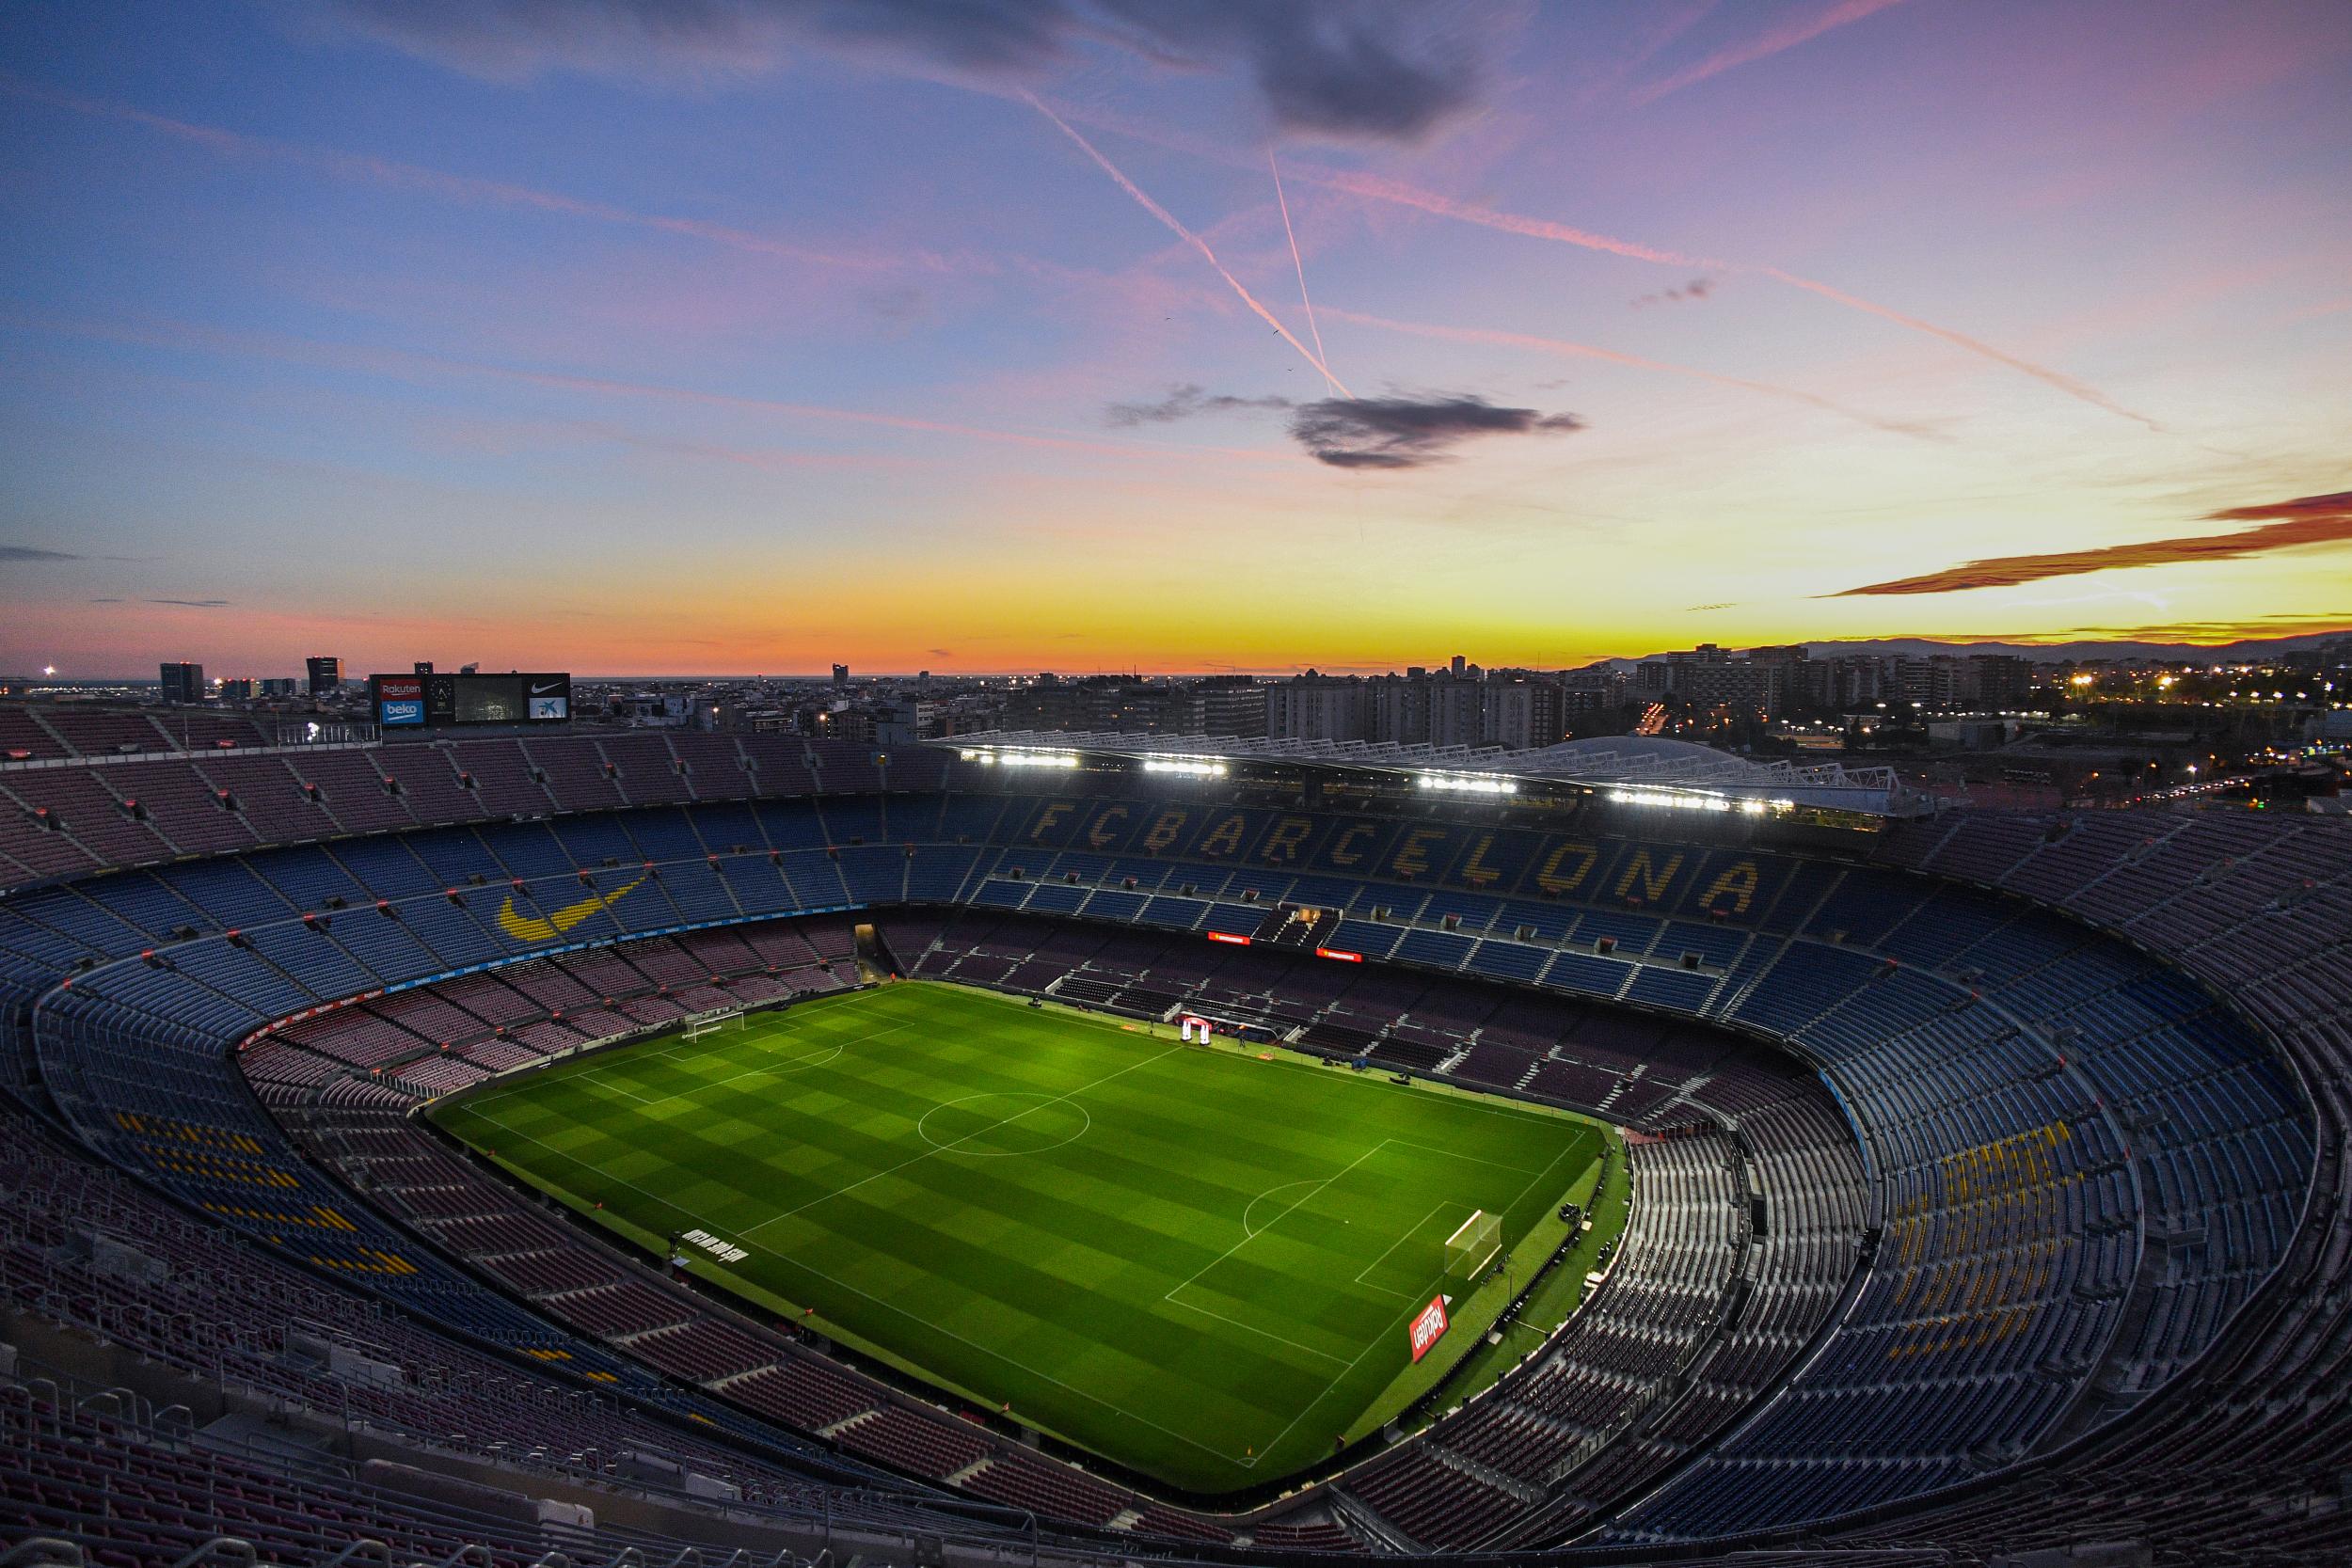 The Nou Camp will not have supporters for the match